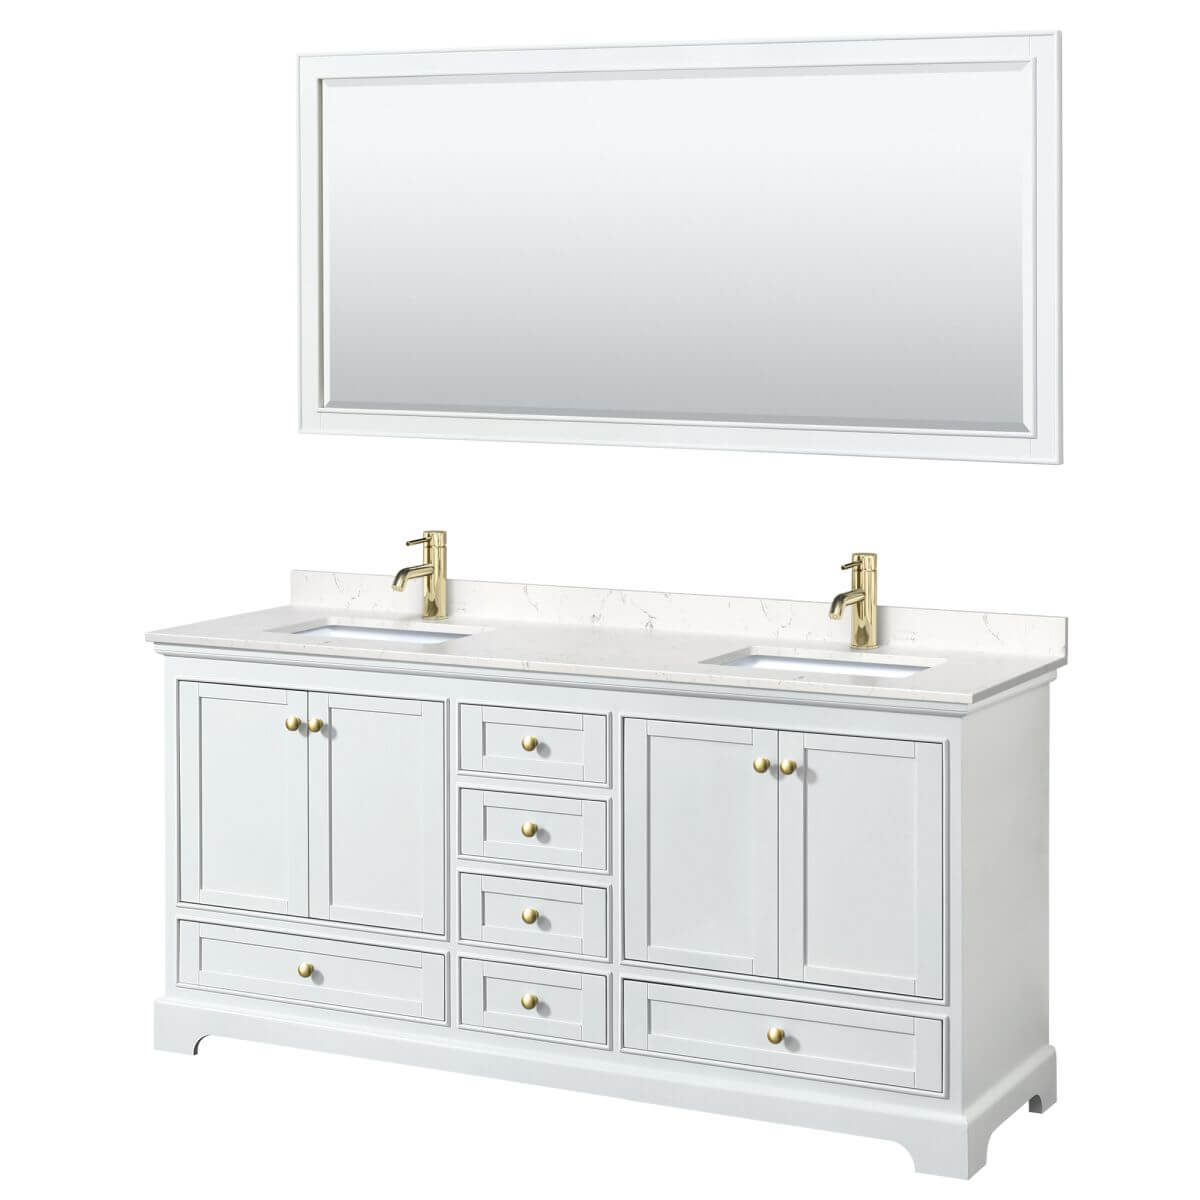 Wyndham Collection Deborah 72 inch Double Bathroom Vanity in White with Carrara Cultured Marble Countertop, Undermount Square Sinks, Brushed Gold Trim and 70 inch Mirror - WCS202072DWGC2UNSM70